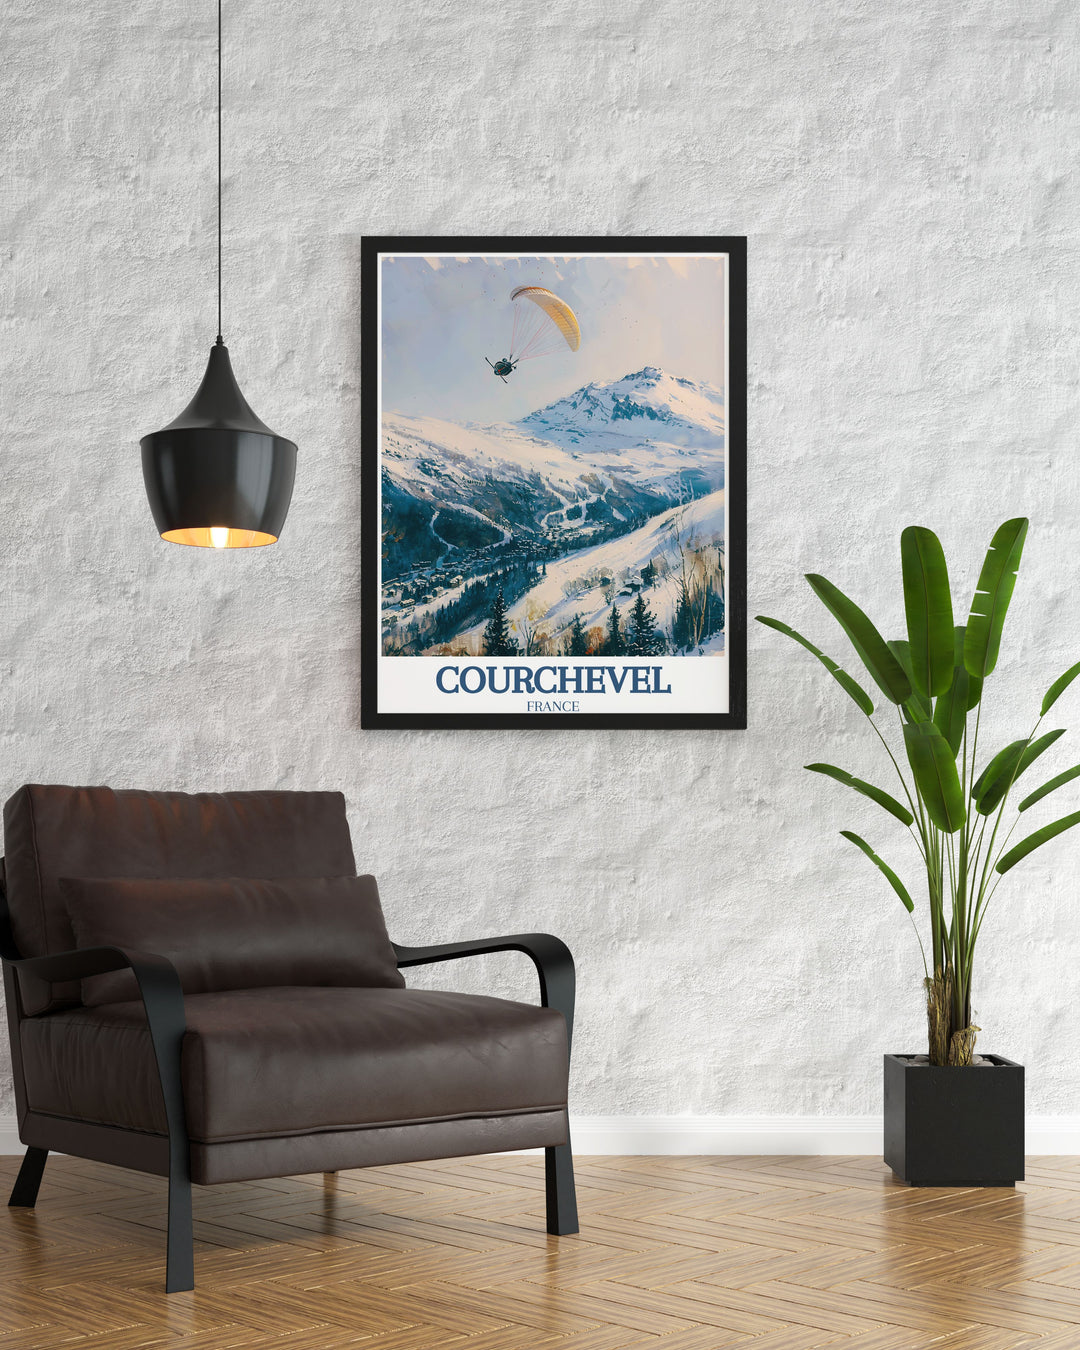 Featuring breathtaking views of Courchevel and the iconic La Saulire, this poster is perfect for those who wish to bring a piece of Frances natural splendor and ski resort luxury into their home.